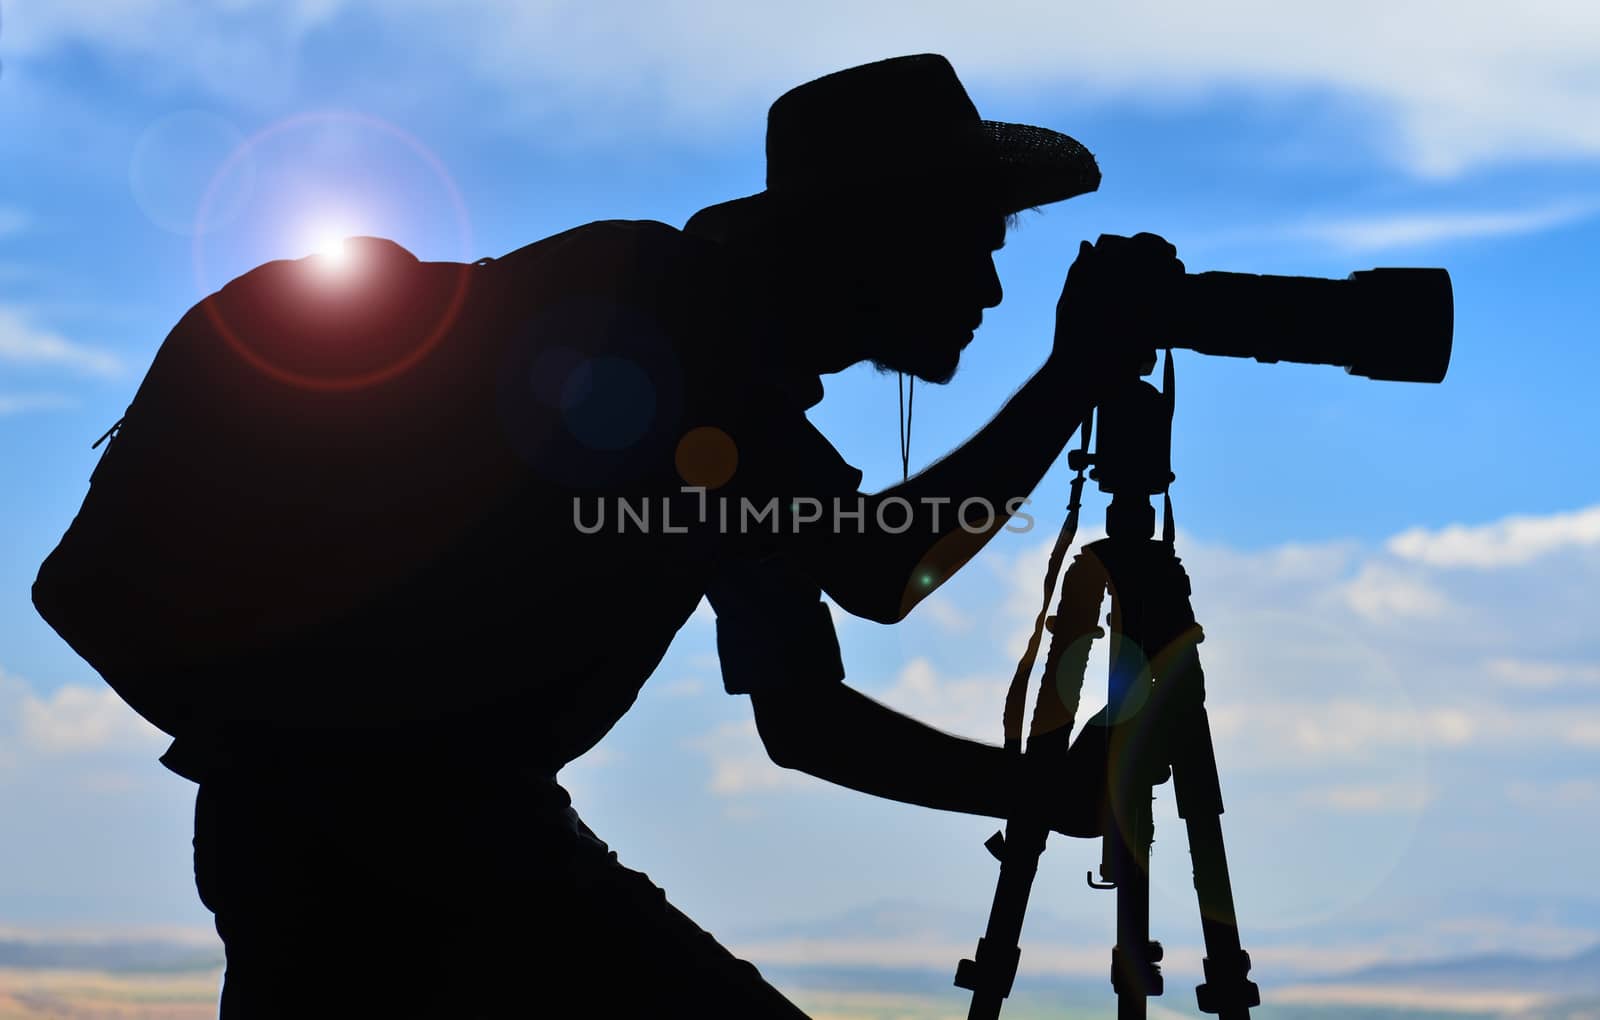 photographer model silhouette by crazymedia007